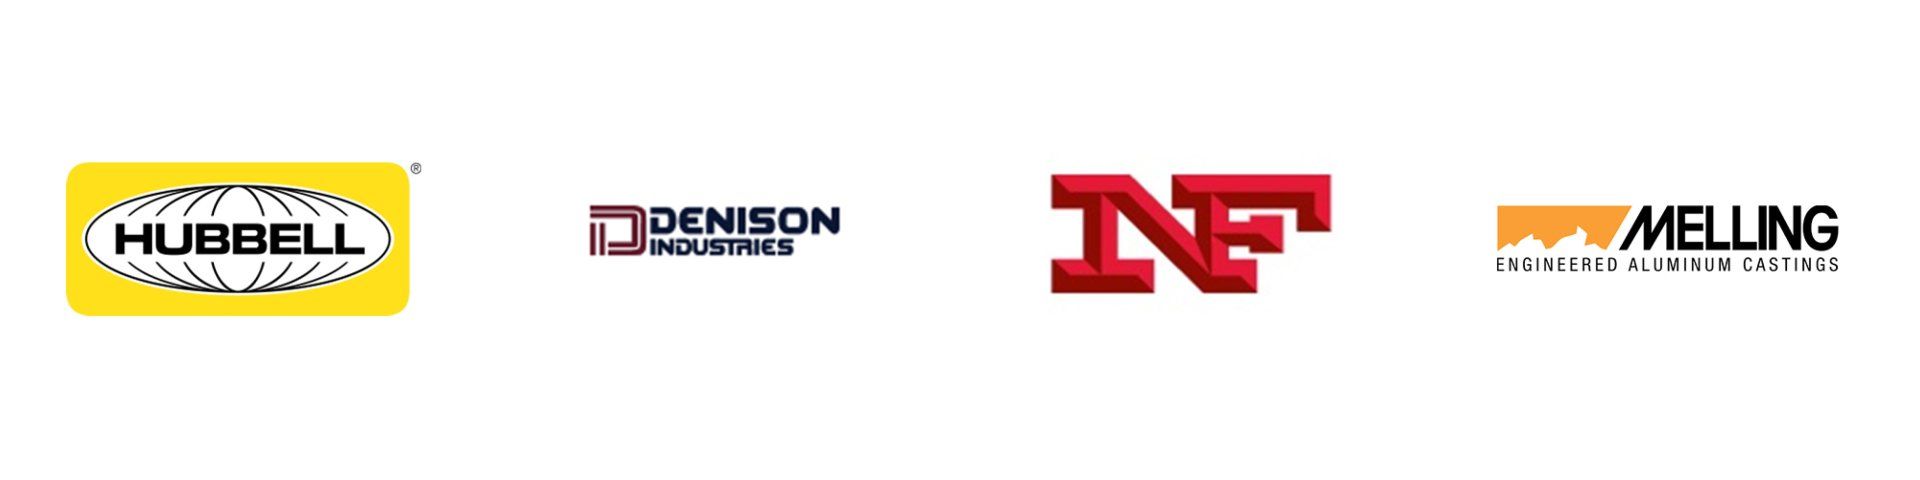 Hubbell, Denison Industries, NF and Melling Logos